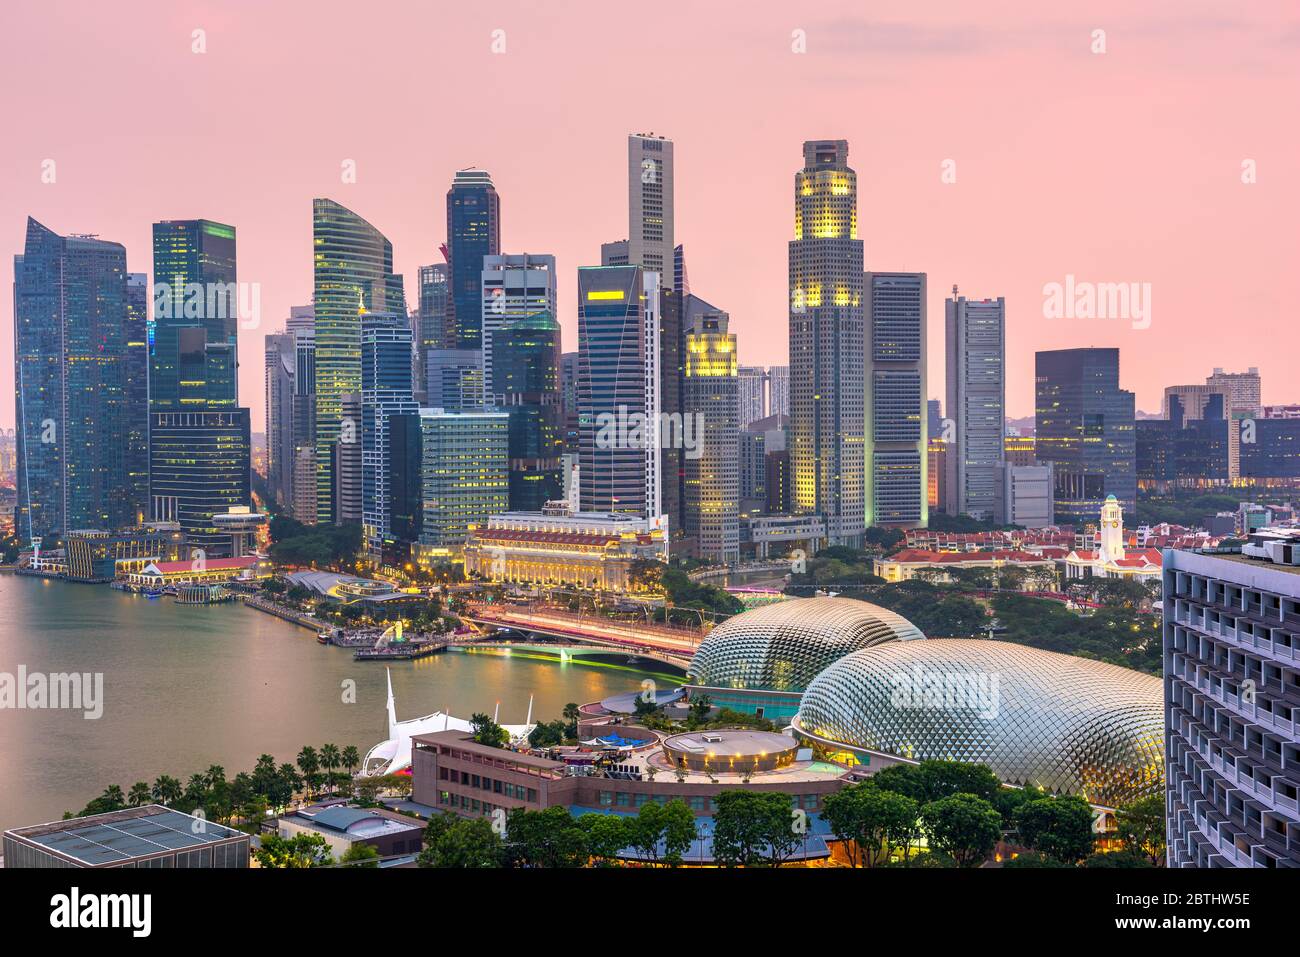 Singapore Financial District skyline at dusk. Stock Photo